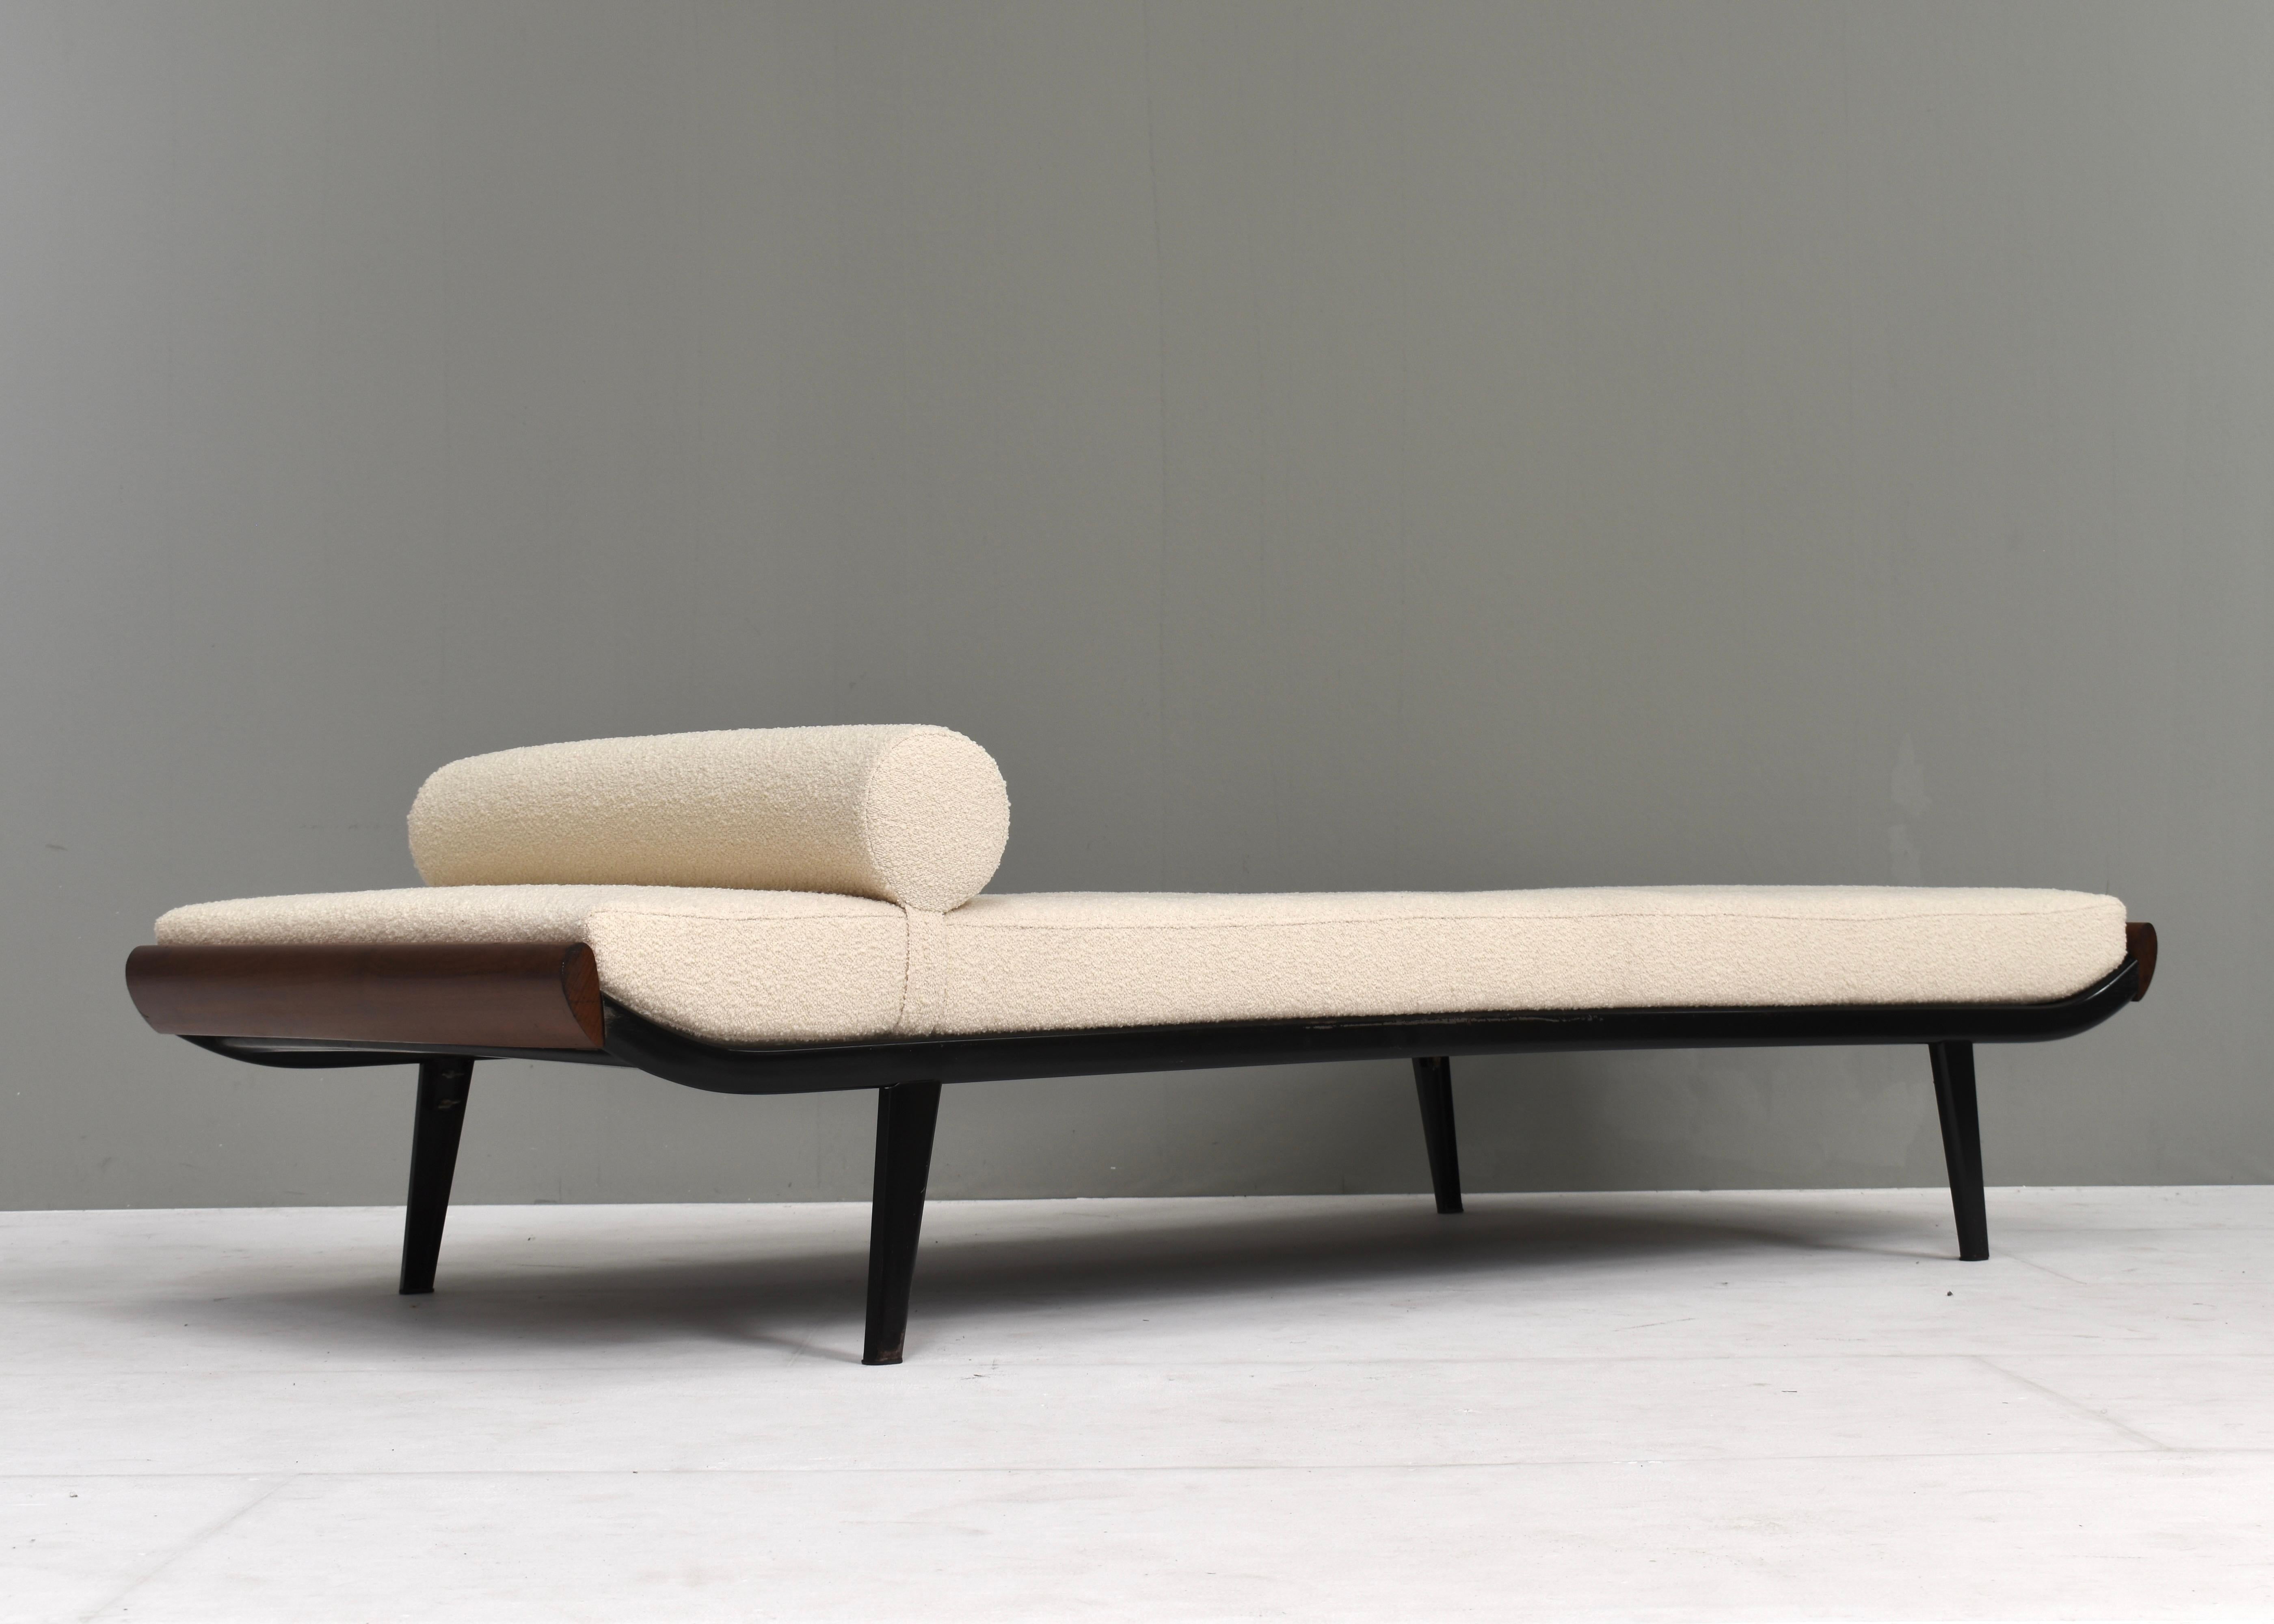 New upholstered daybed by Dick Cordemeijer for Auping, Netherlands – 1953.
The Cleopatra daybed has a new mattress and off-white bouclé fabric by Bisson Bruneel, Paris.
In good condition with new mattress and upholstery. The metal frame shows